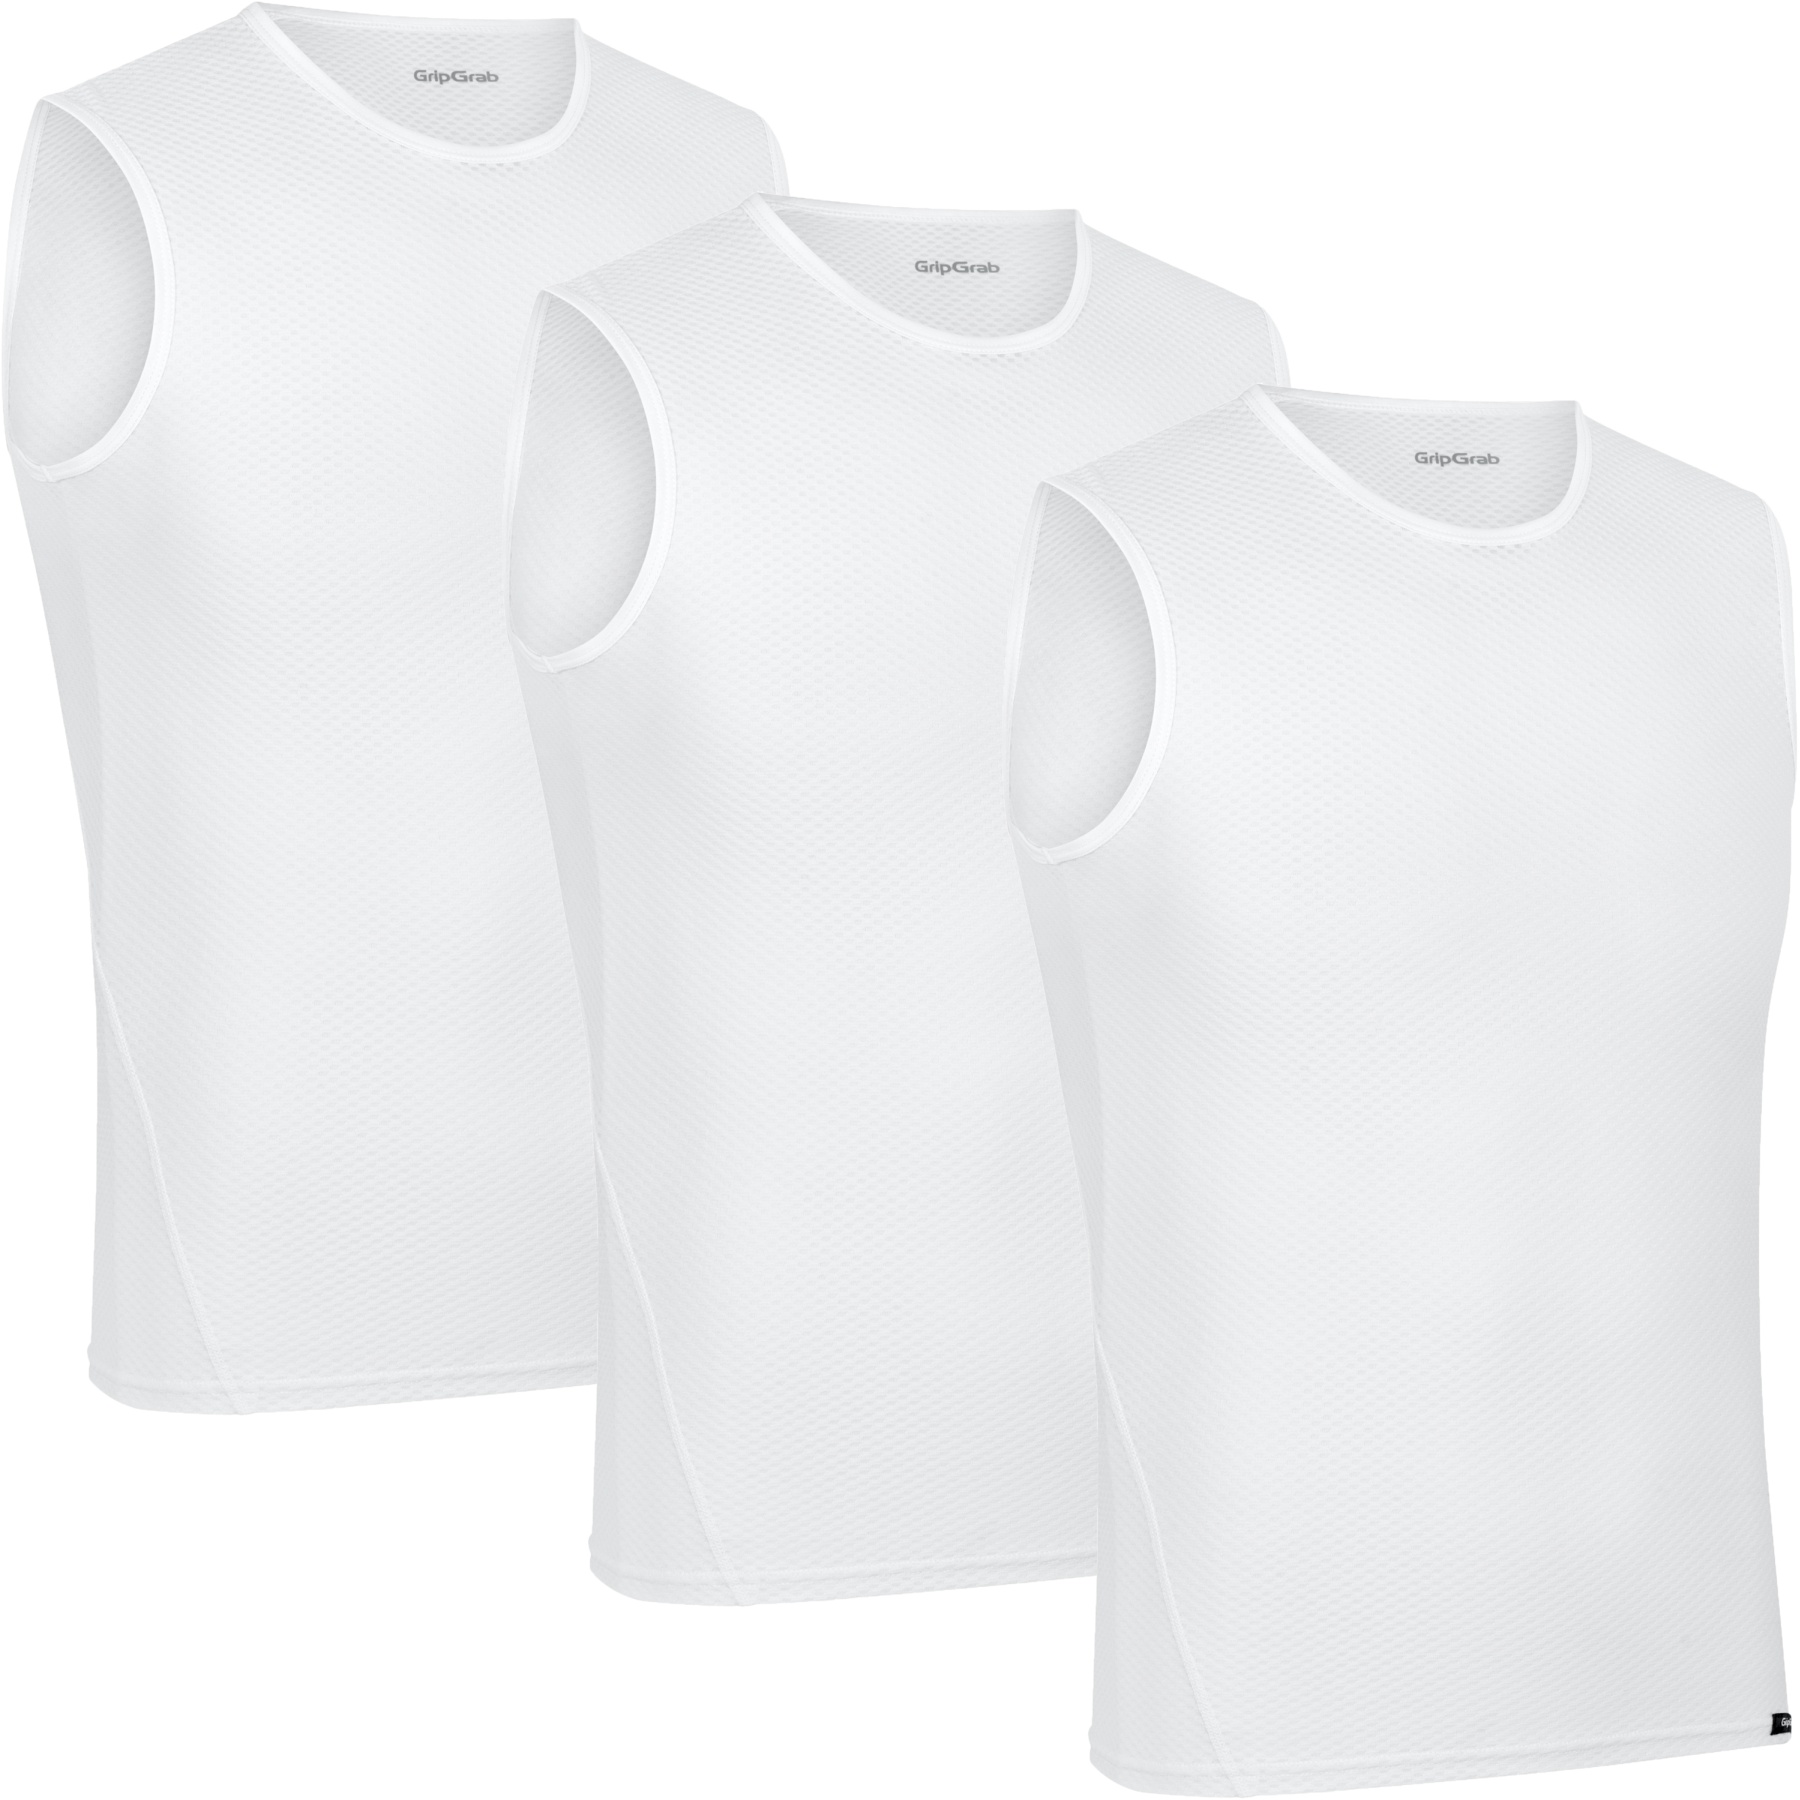 Picture of GripGrab Ultralight Sleeveless Mesh Baselayer 3PACK - White